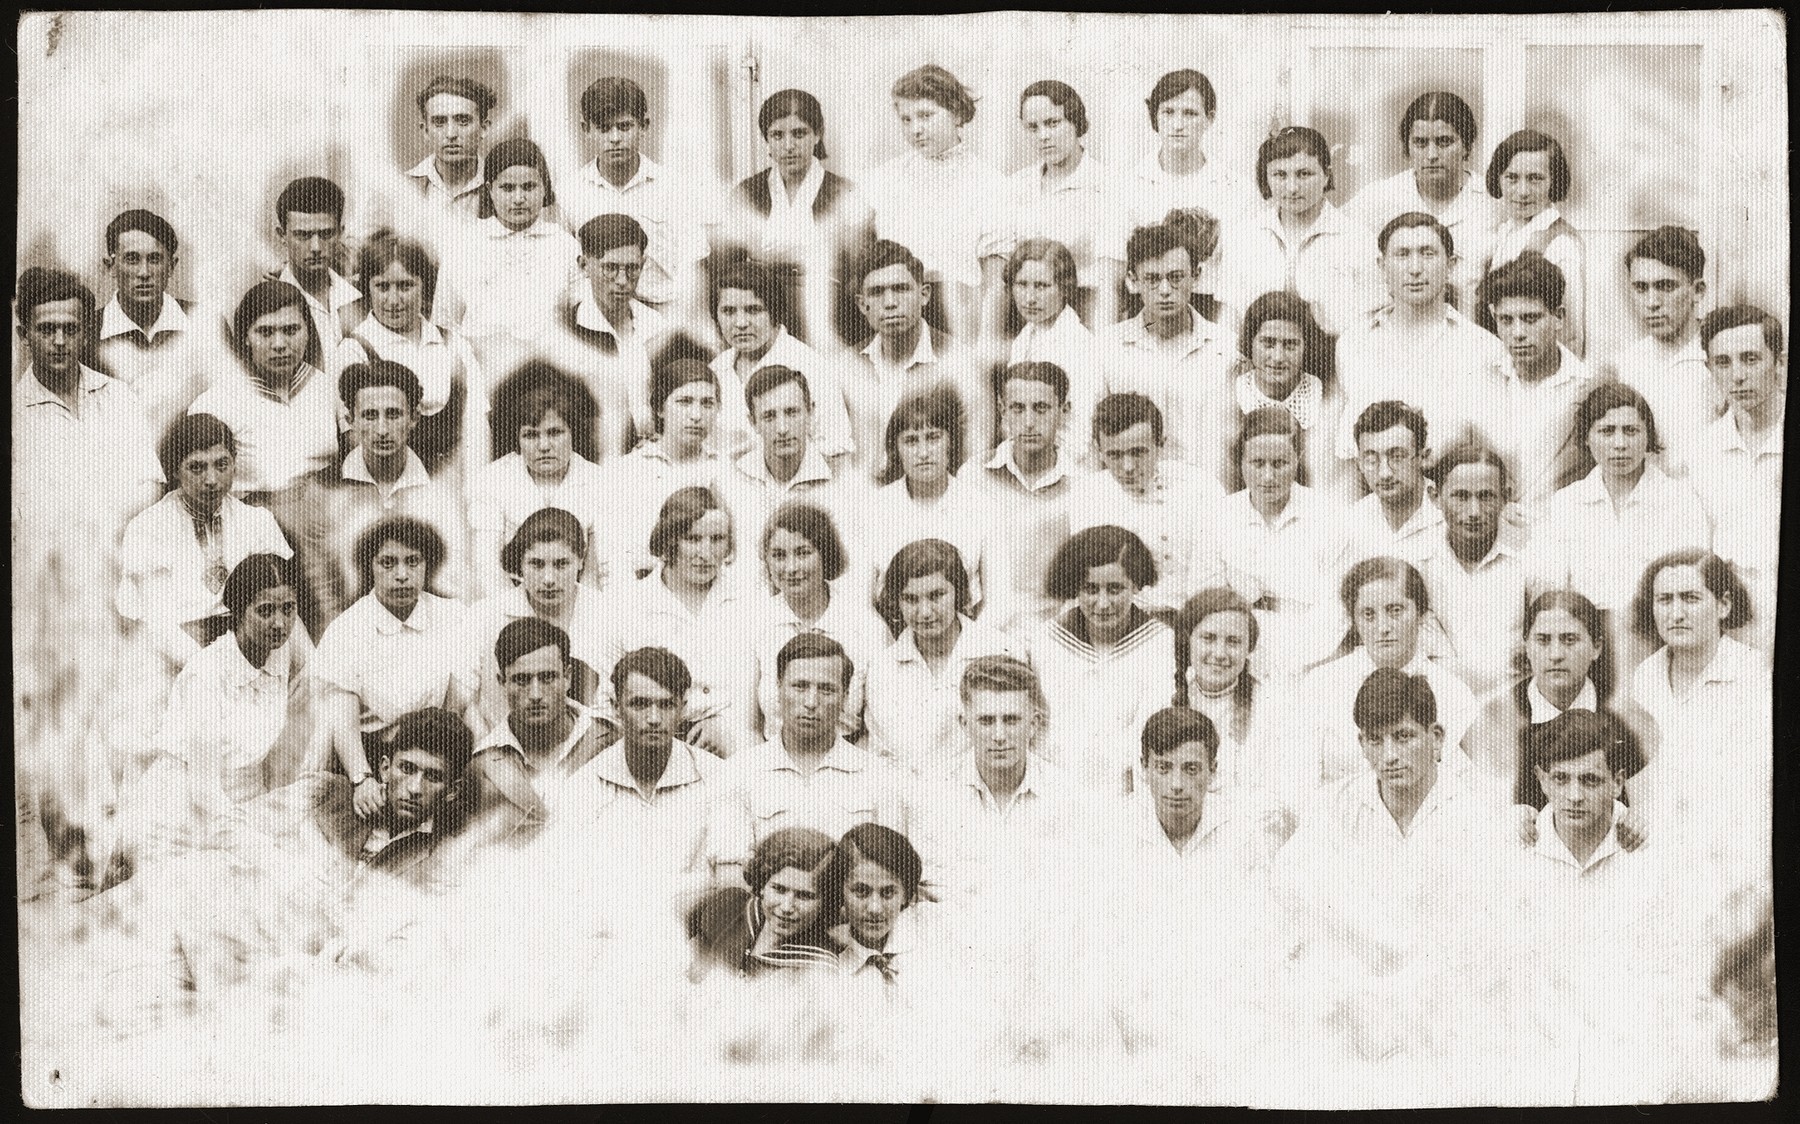 Group portrait of members of the Hashomer Hatzair hachshara in Kalisz. 

Among those pictured is Meir Orkin, a leader of the Bialystok Hashomer Hatzair group (third row from the front, on the far right), who later married Haika Grosman.